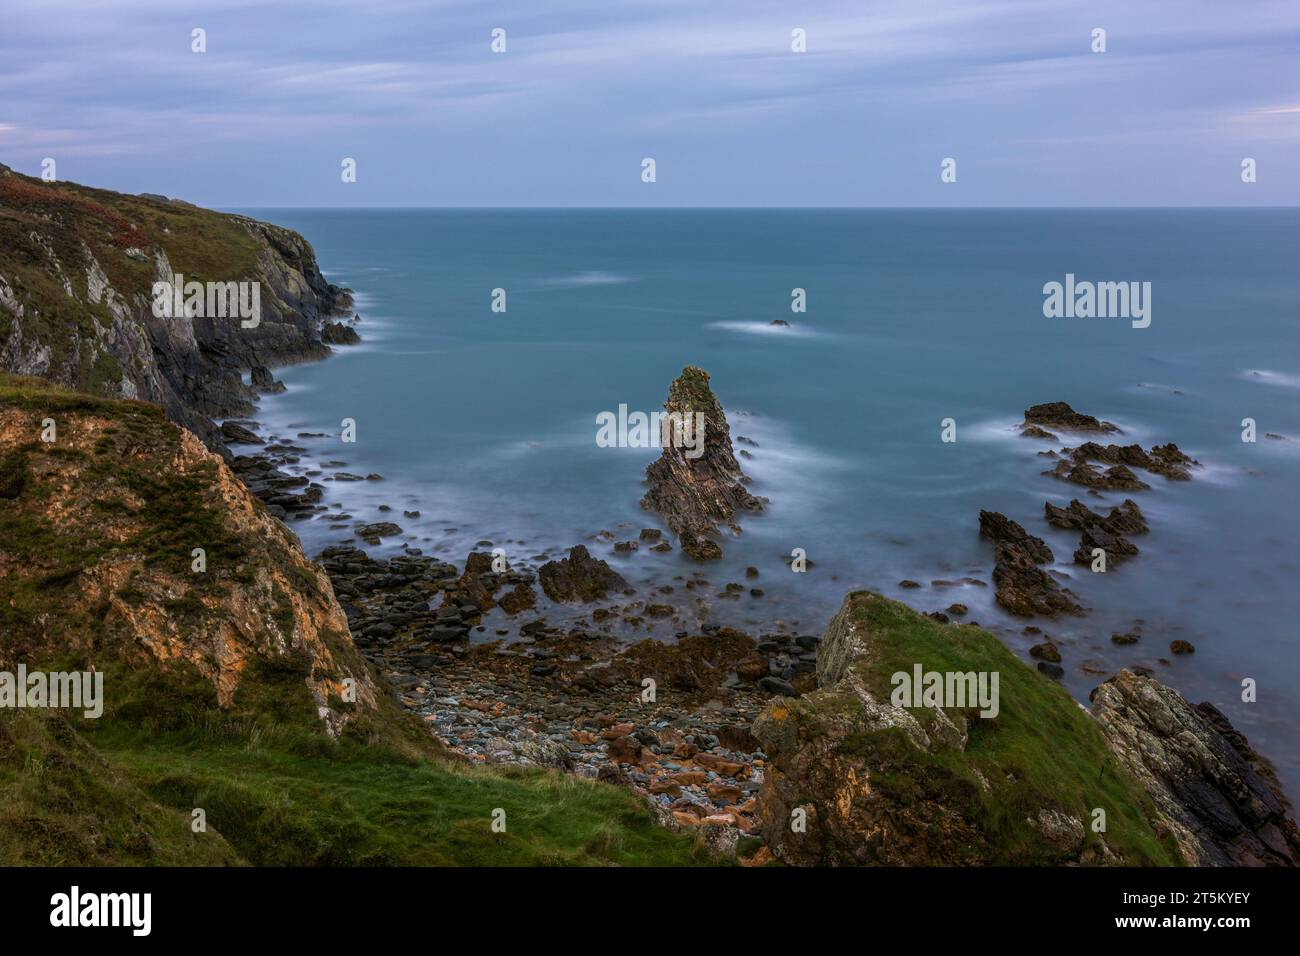 Iconic sea stacks in Rhoscolyn, Wales. Stock Photo